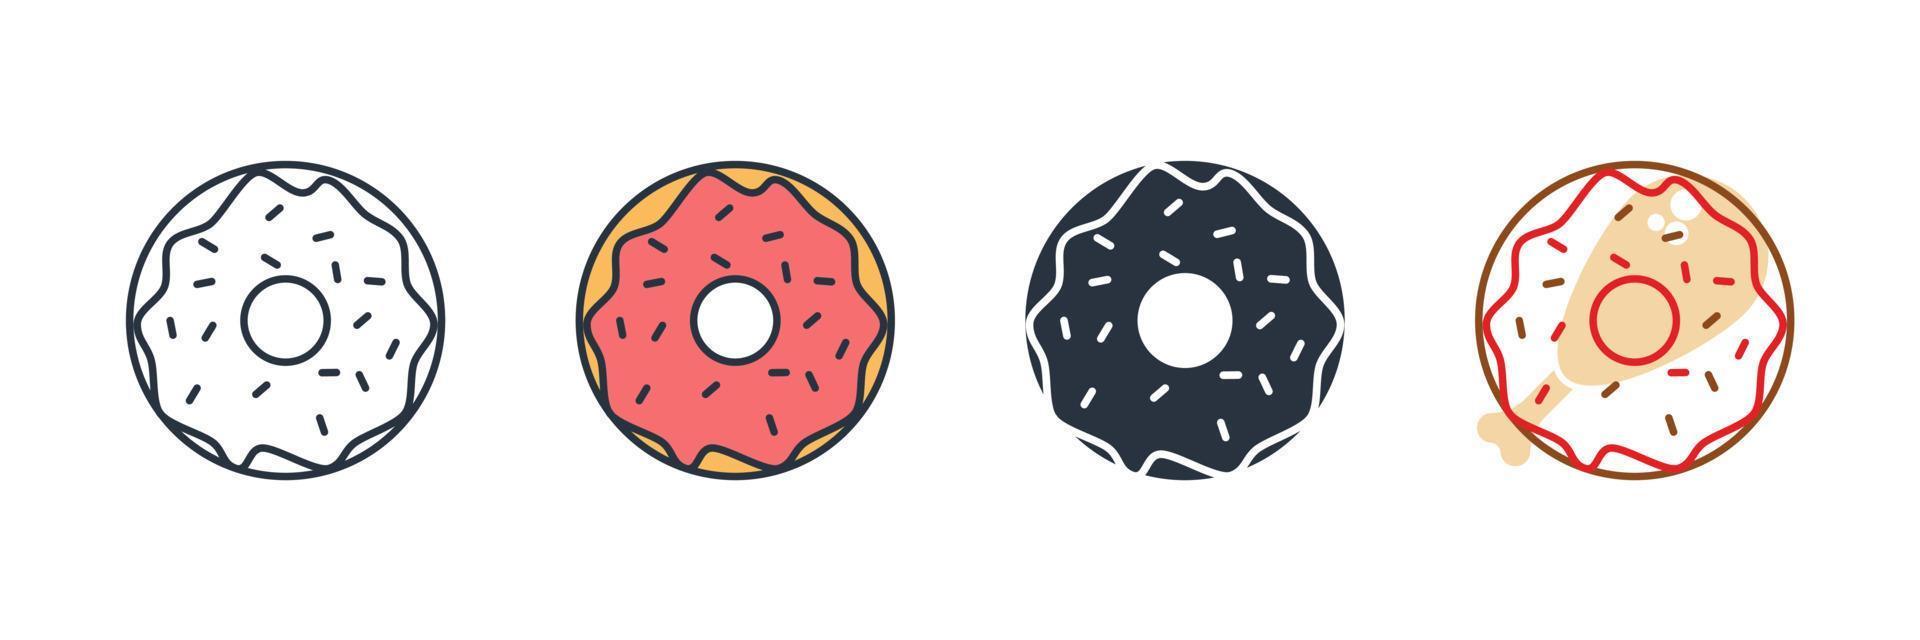 donut icon logo vector illustration. donut food symbol template for graphic and web design collection